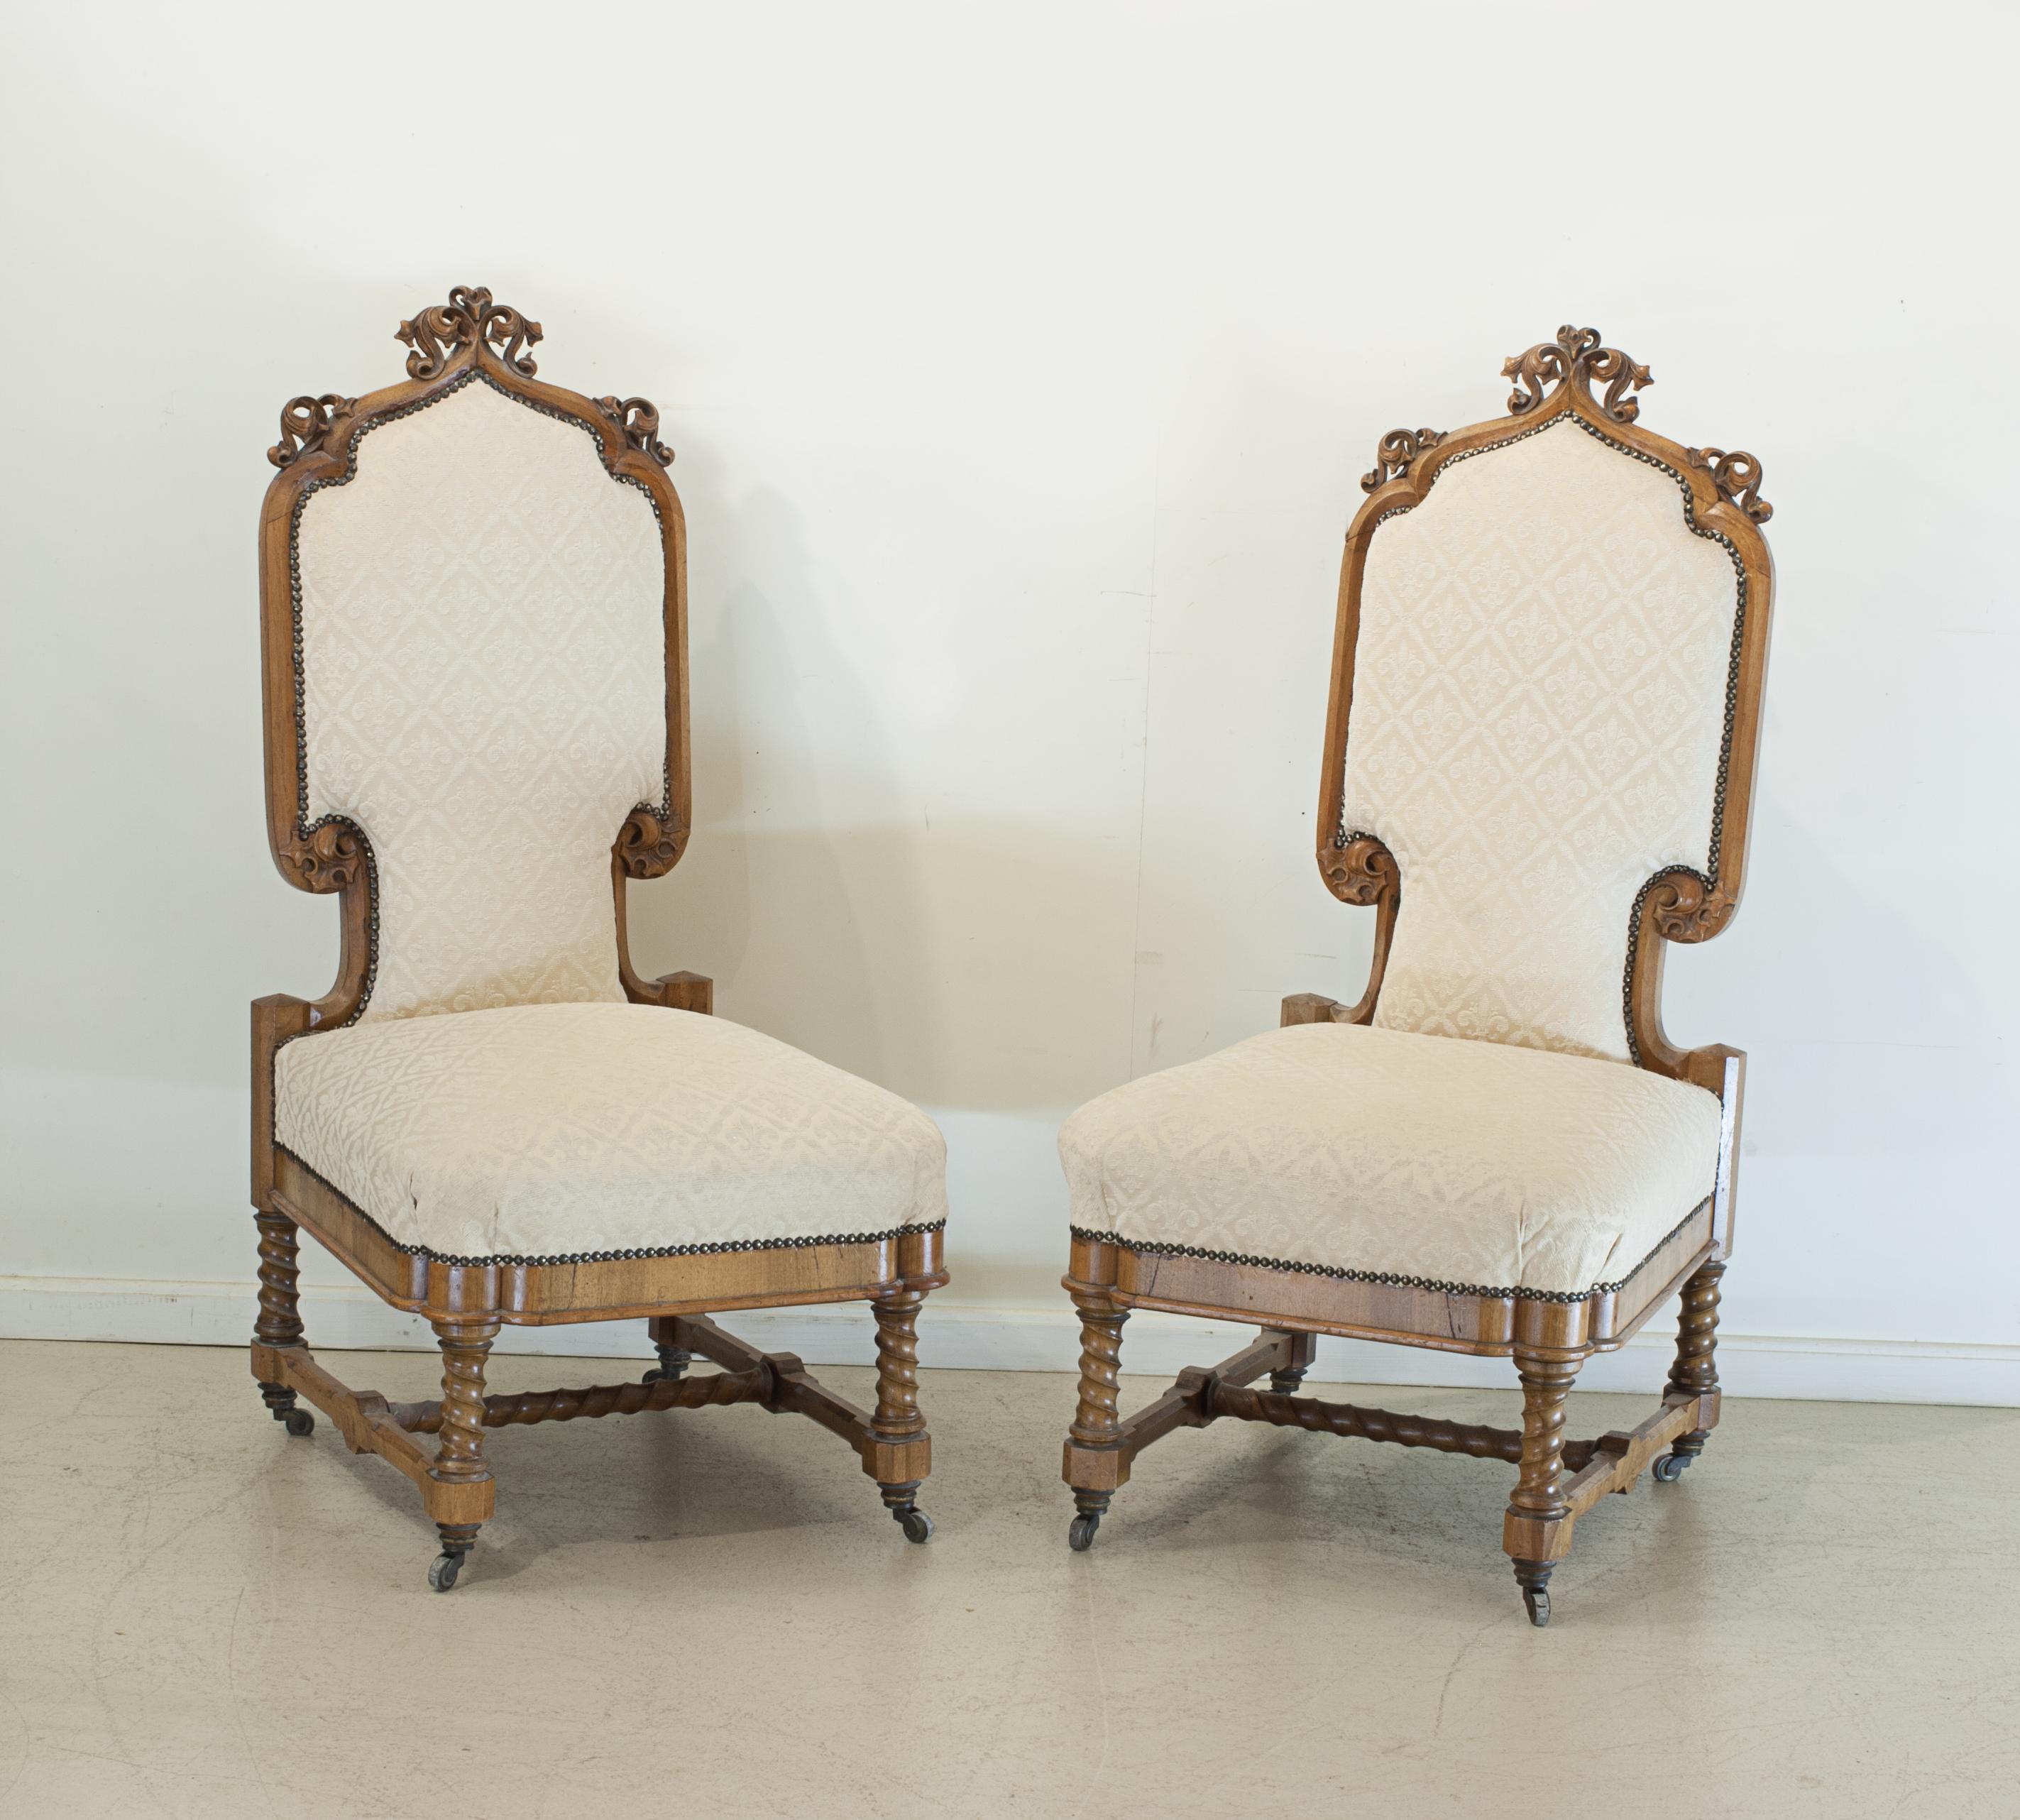 Pair of carved 19th century continental chairs.
A lovely pair of upholstered Arts & Crafts hall chairs, the carved walnut frames with crisp details, stretcher a spiral corkscrew-like form (barley twist style) as is the lower portion on the four